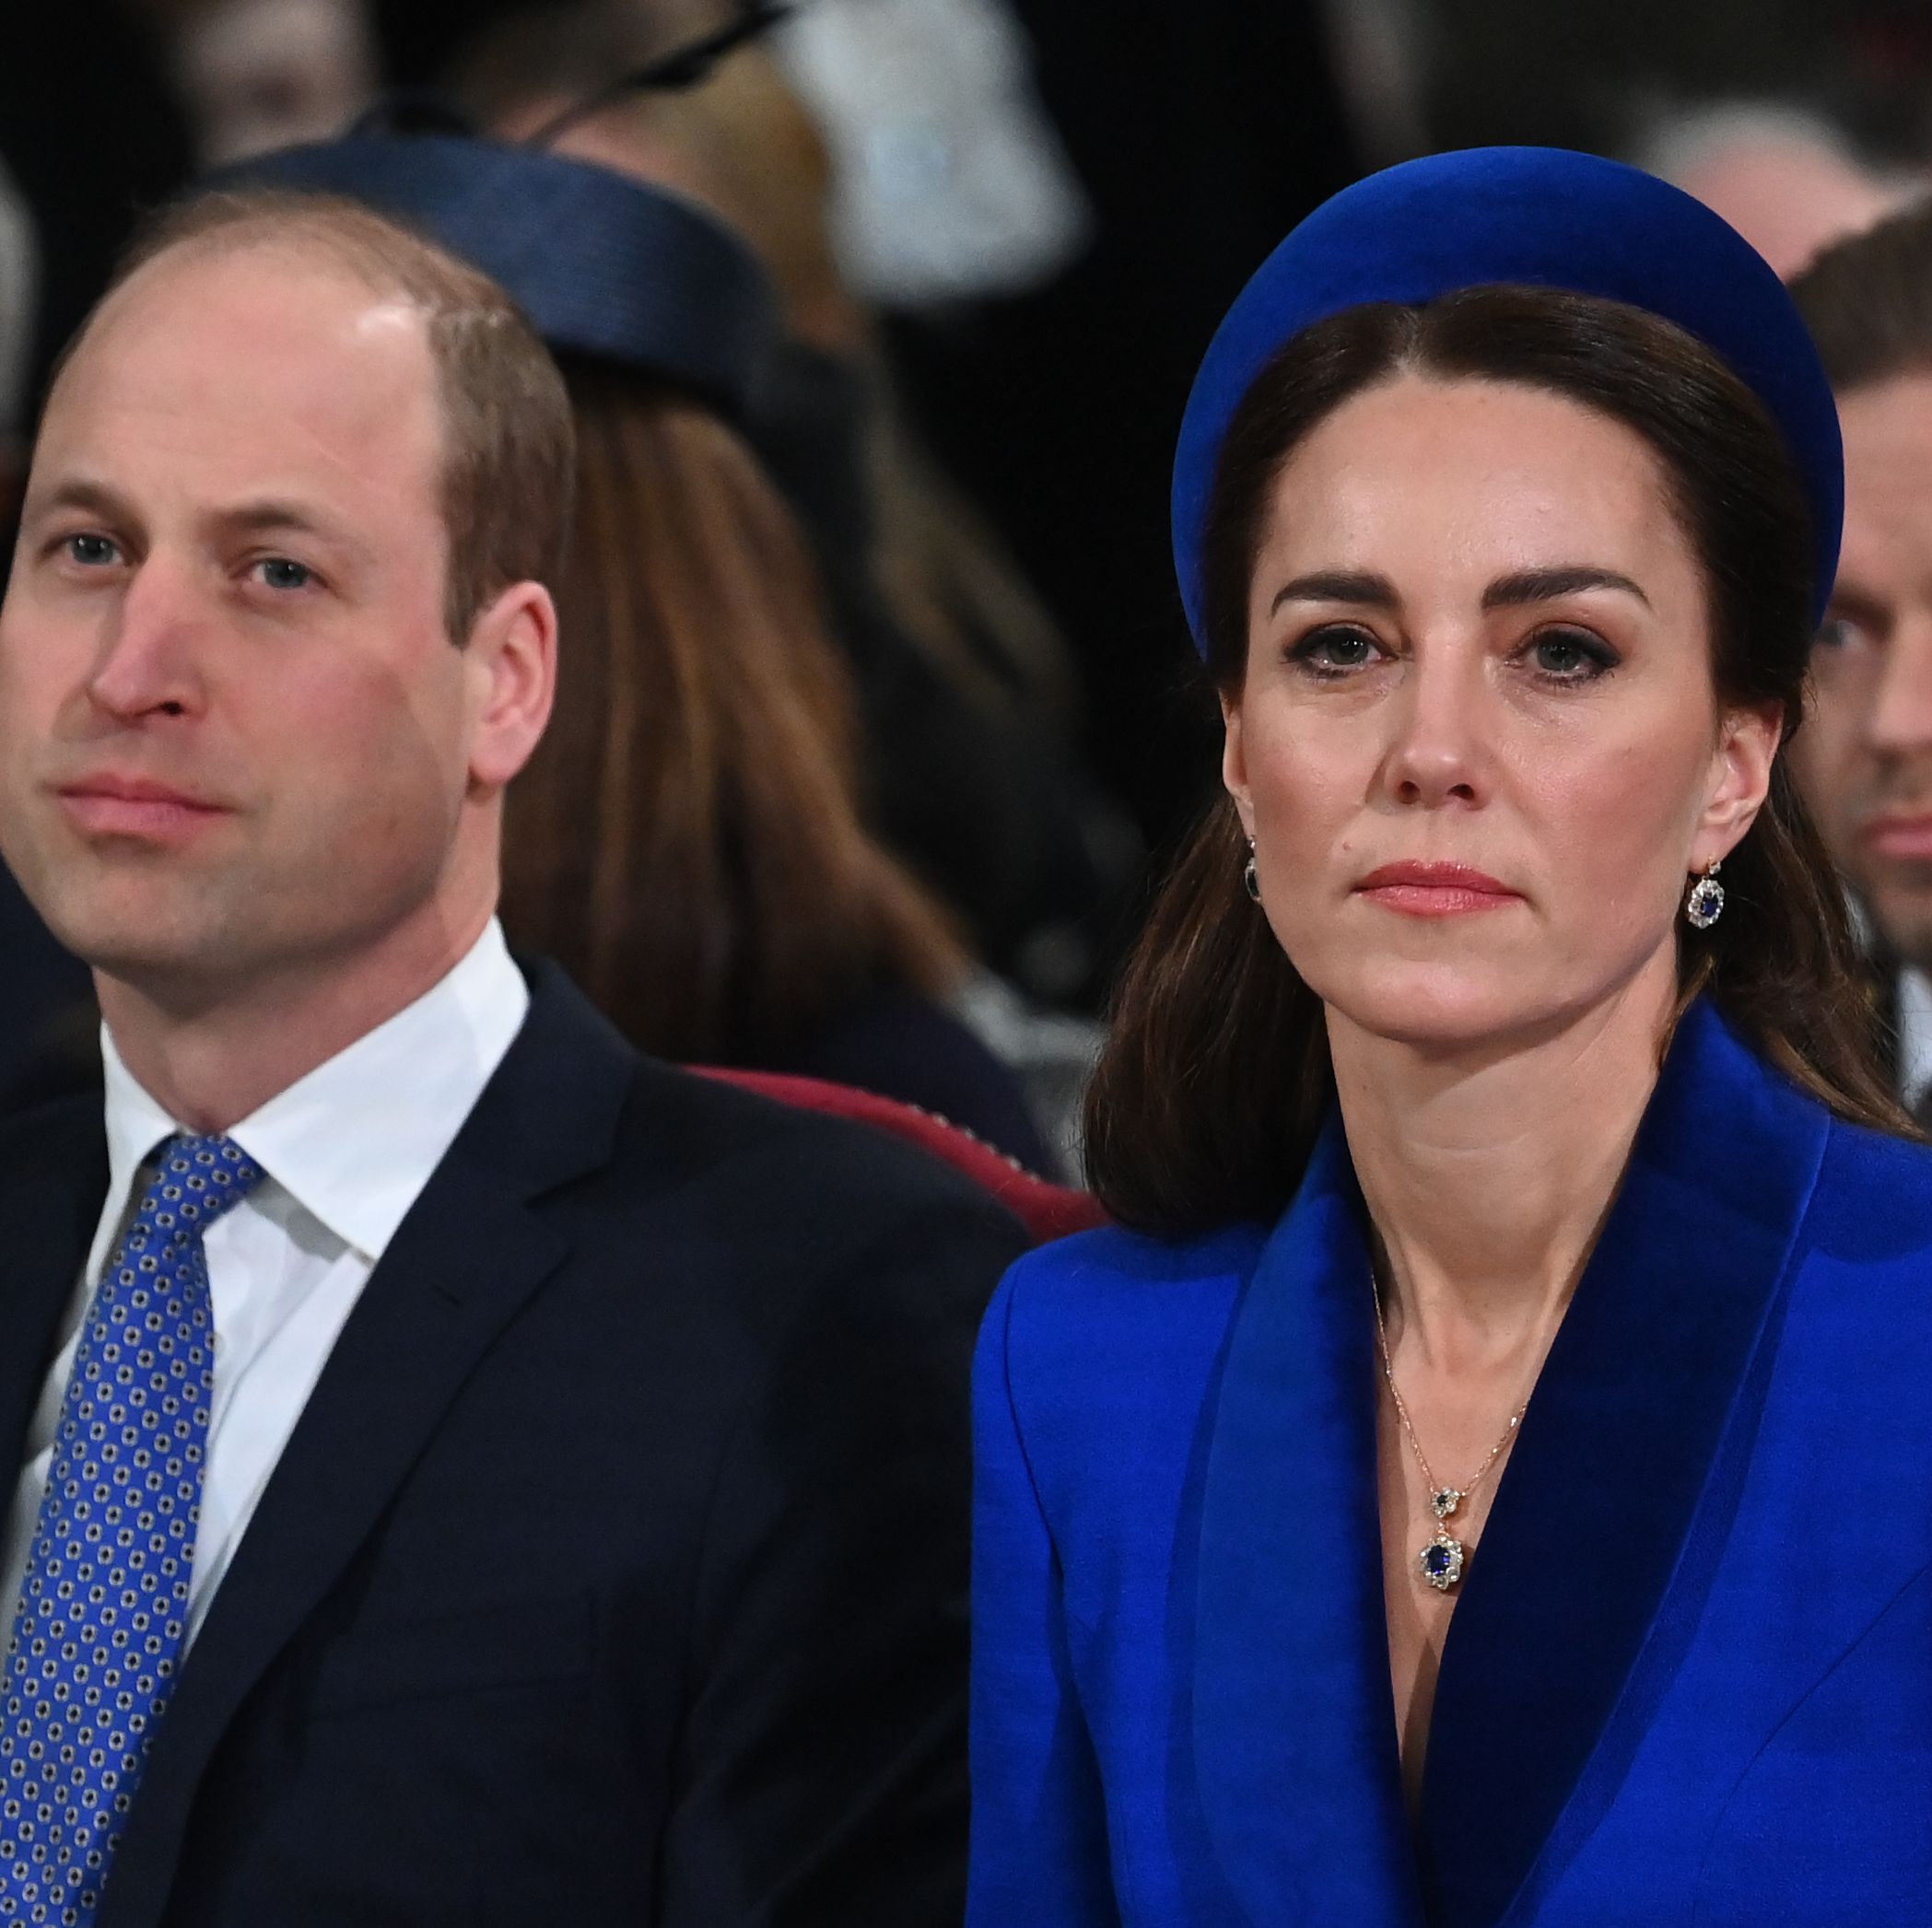 Prince William and Kate Middleton Are Moving to Windsor ASAP as Royals Fear the Queen Is Too Close to Andrew